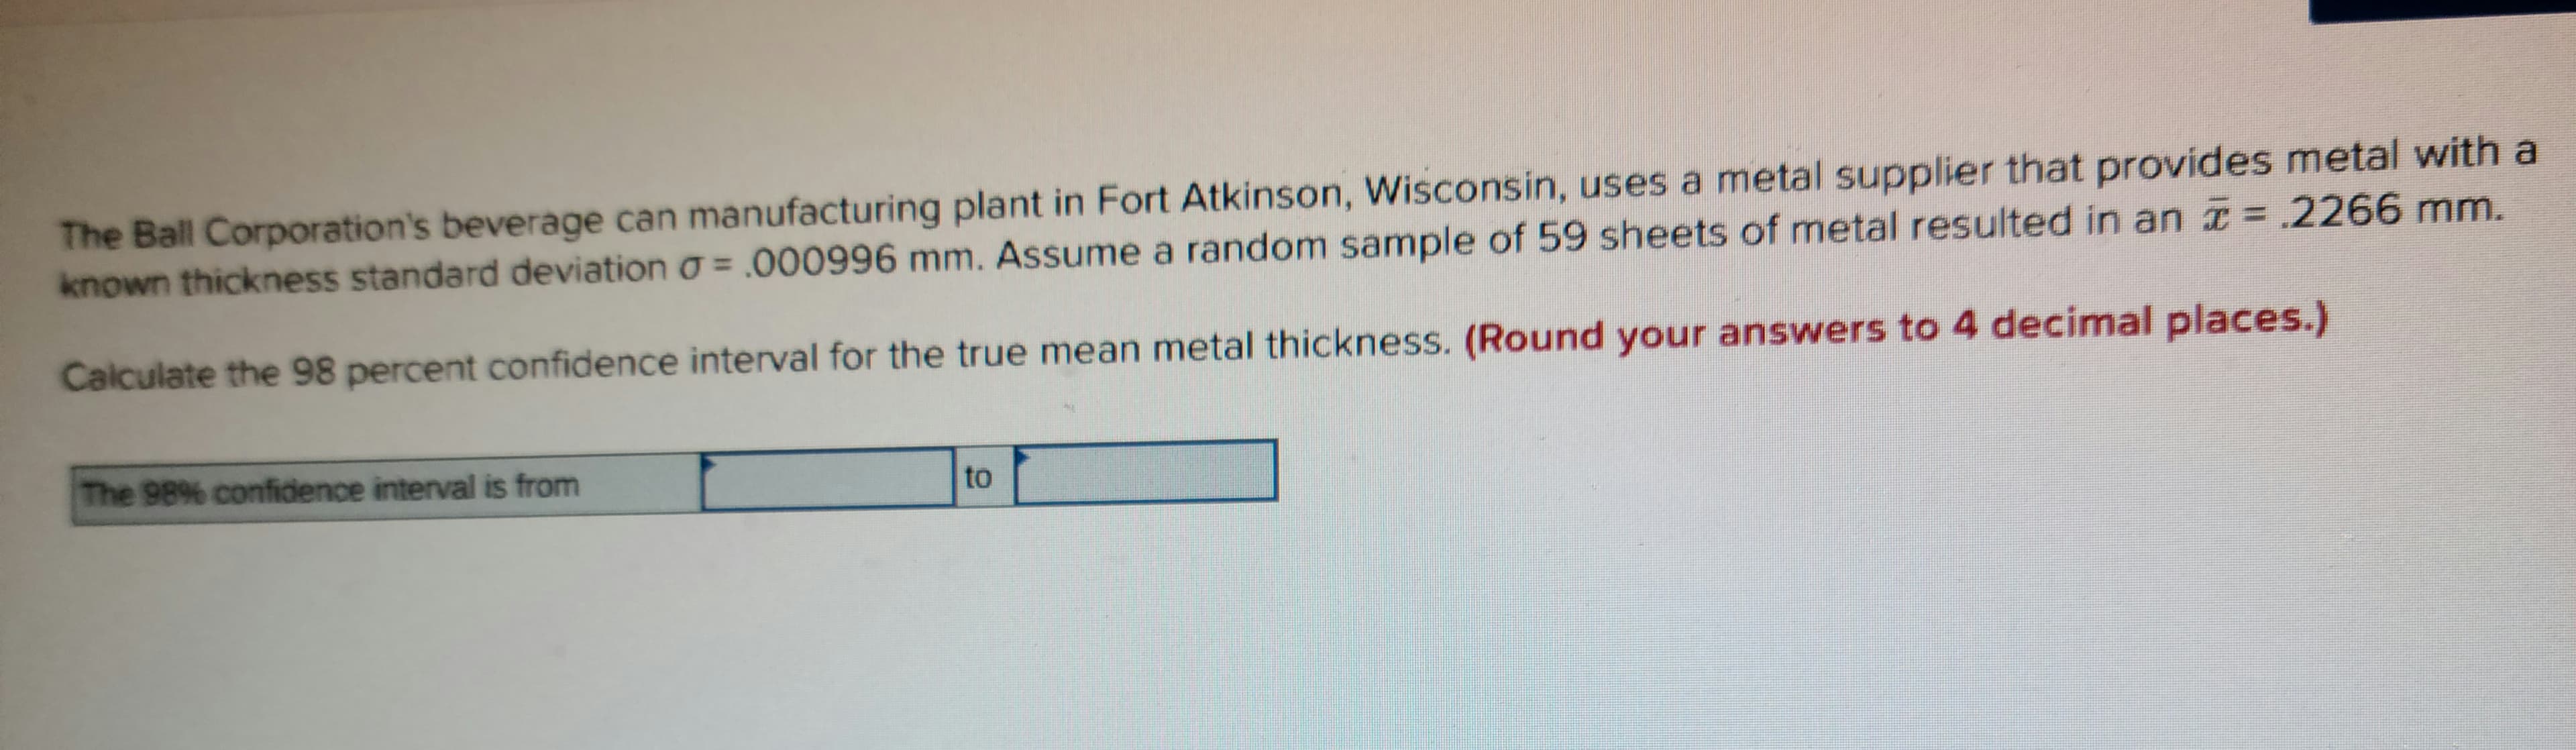 The Ball Corporation's beverage can manufacturing plant in Fort Atkinson, Wisconsin, uses a metal supplier that provides metal with a
known thickness standard deviation o = .000996 mm. Assume a random sample of 59 sheets of metal resulted in an = .2266 mm.
Calculate the 98 percent confidence interval for the true mean metal thickness. (Round your answers to 4 decimal places.)
The 98% confidence interval is from
to
